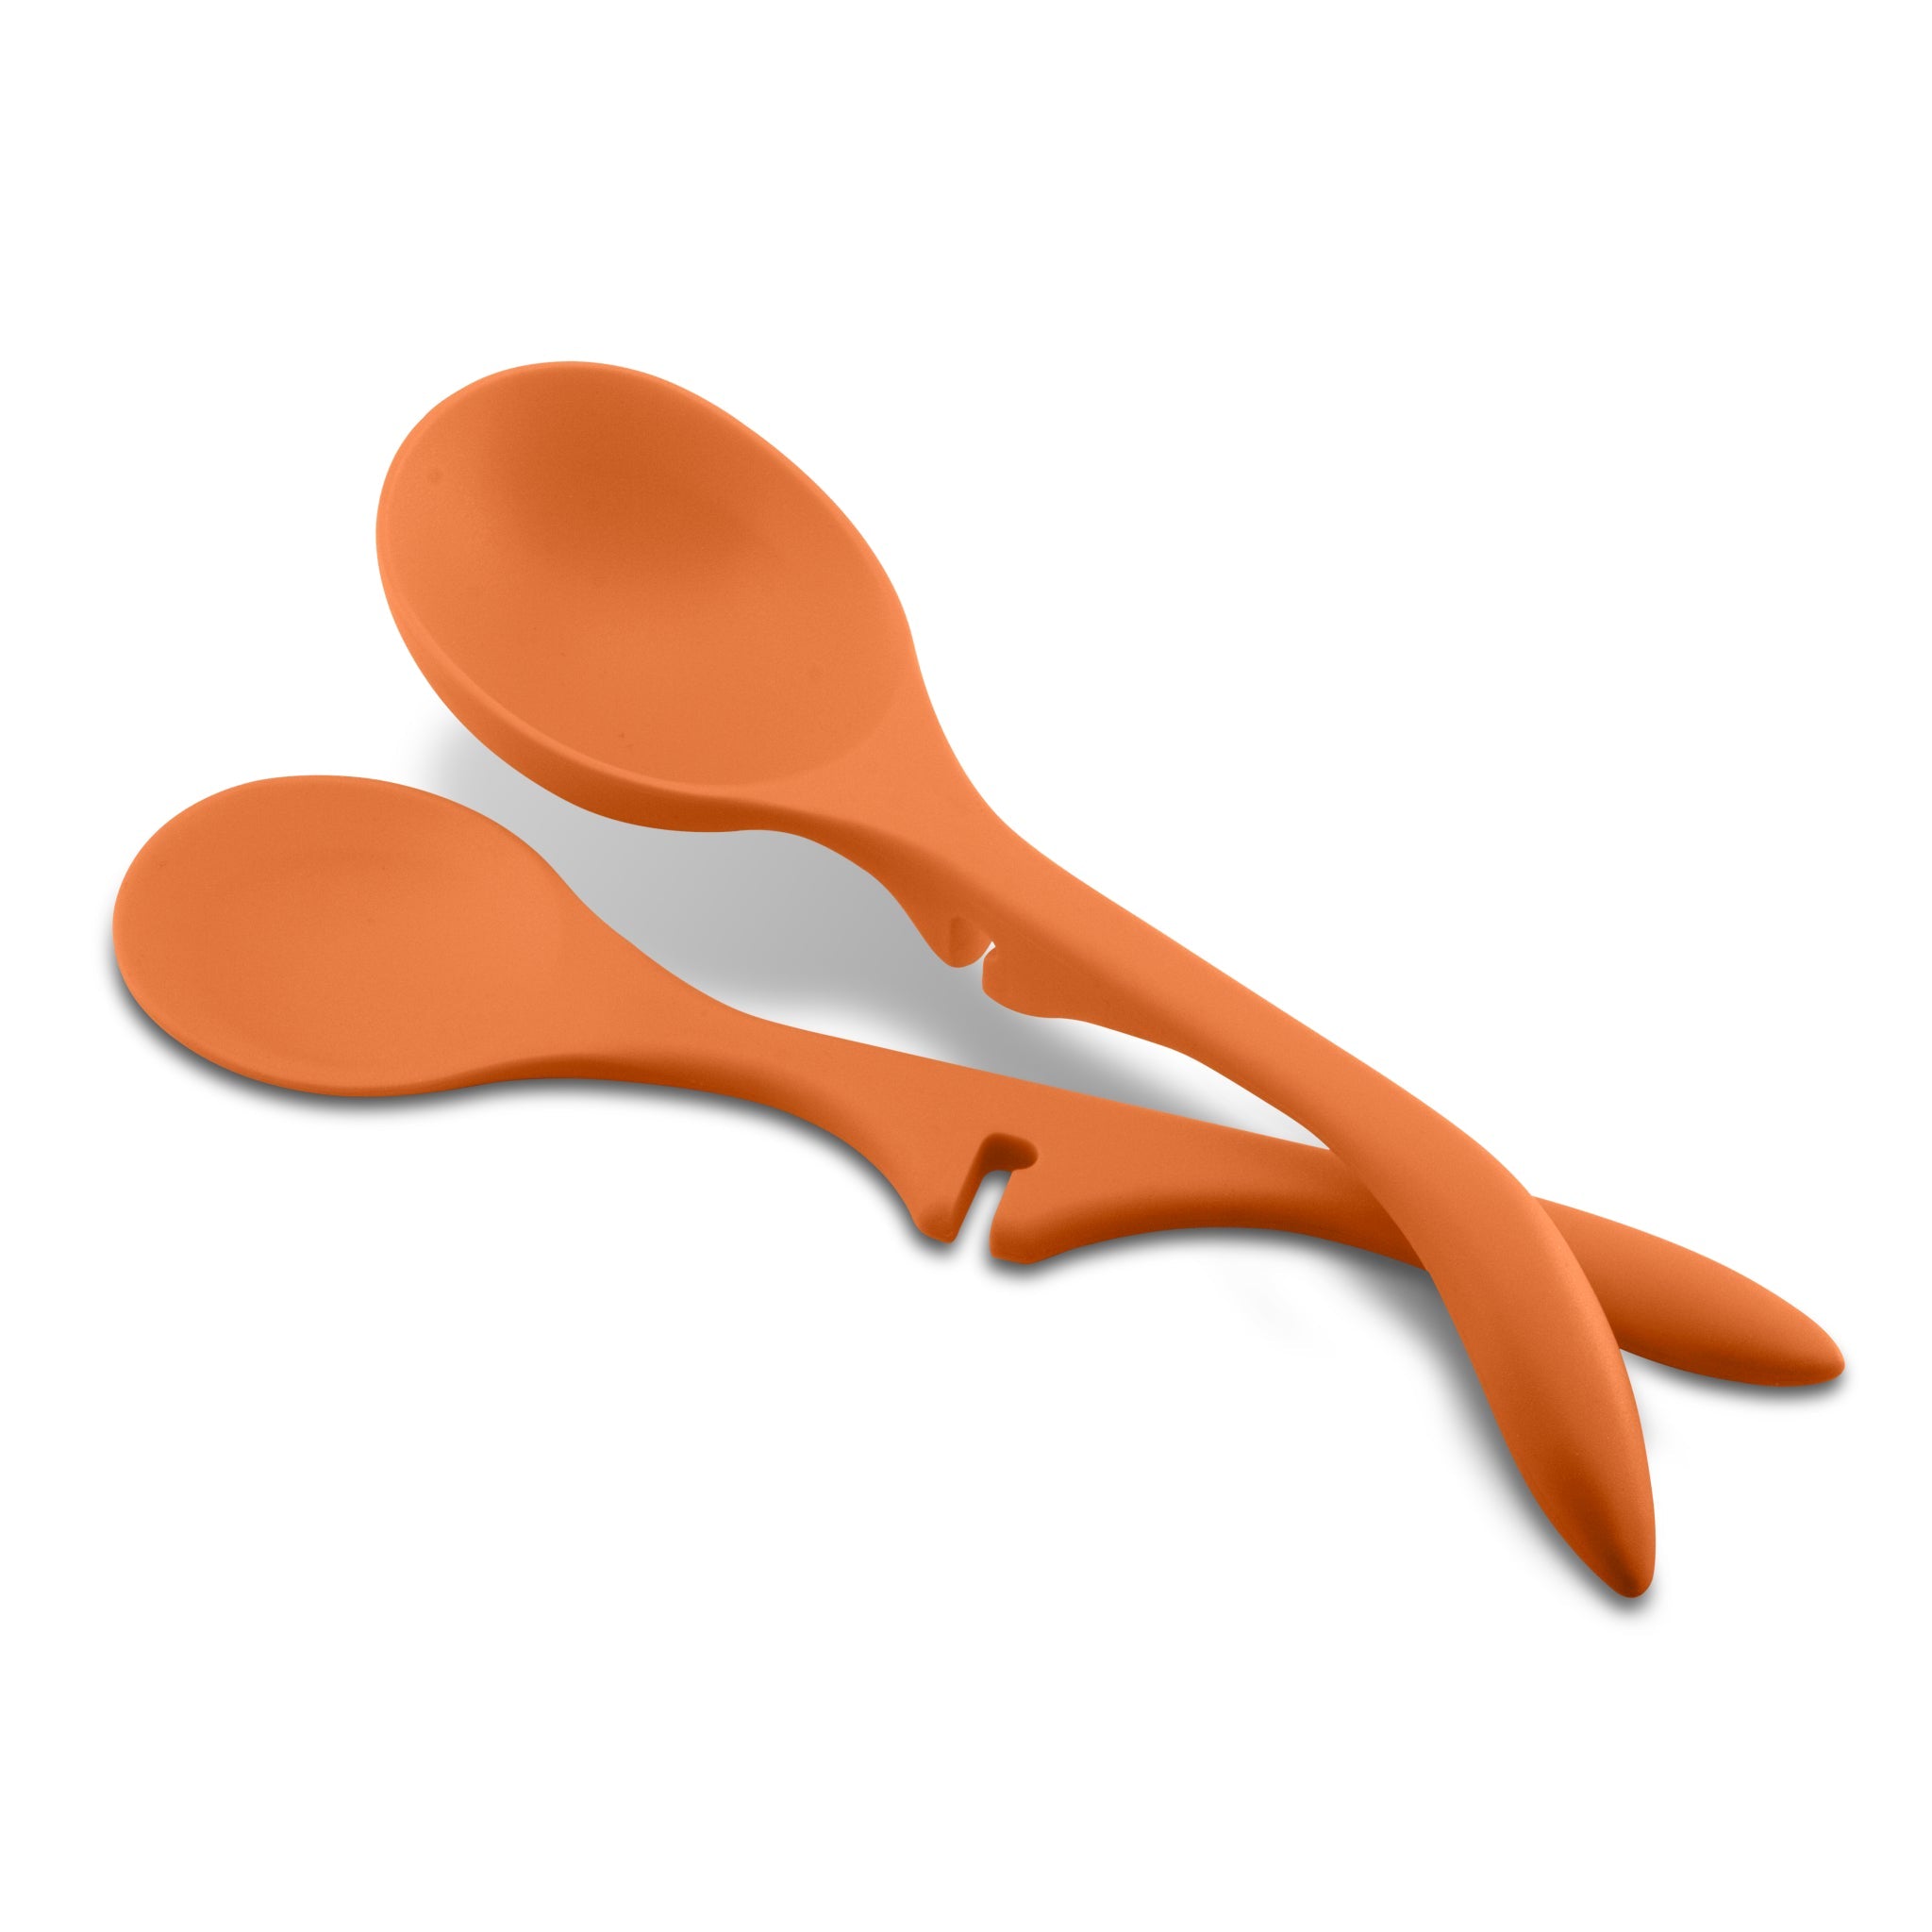 Lazy Ladle and Spoon Set